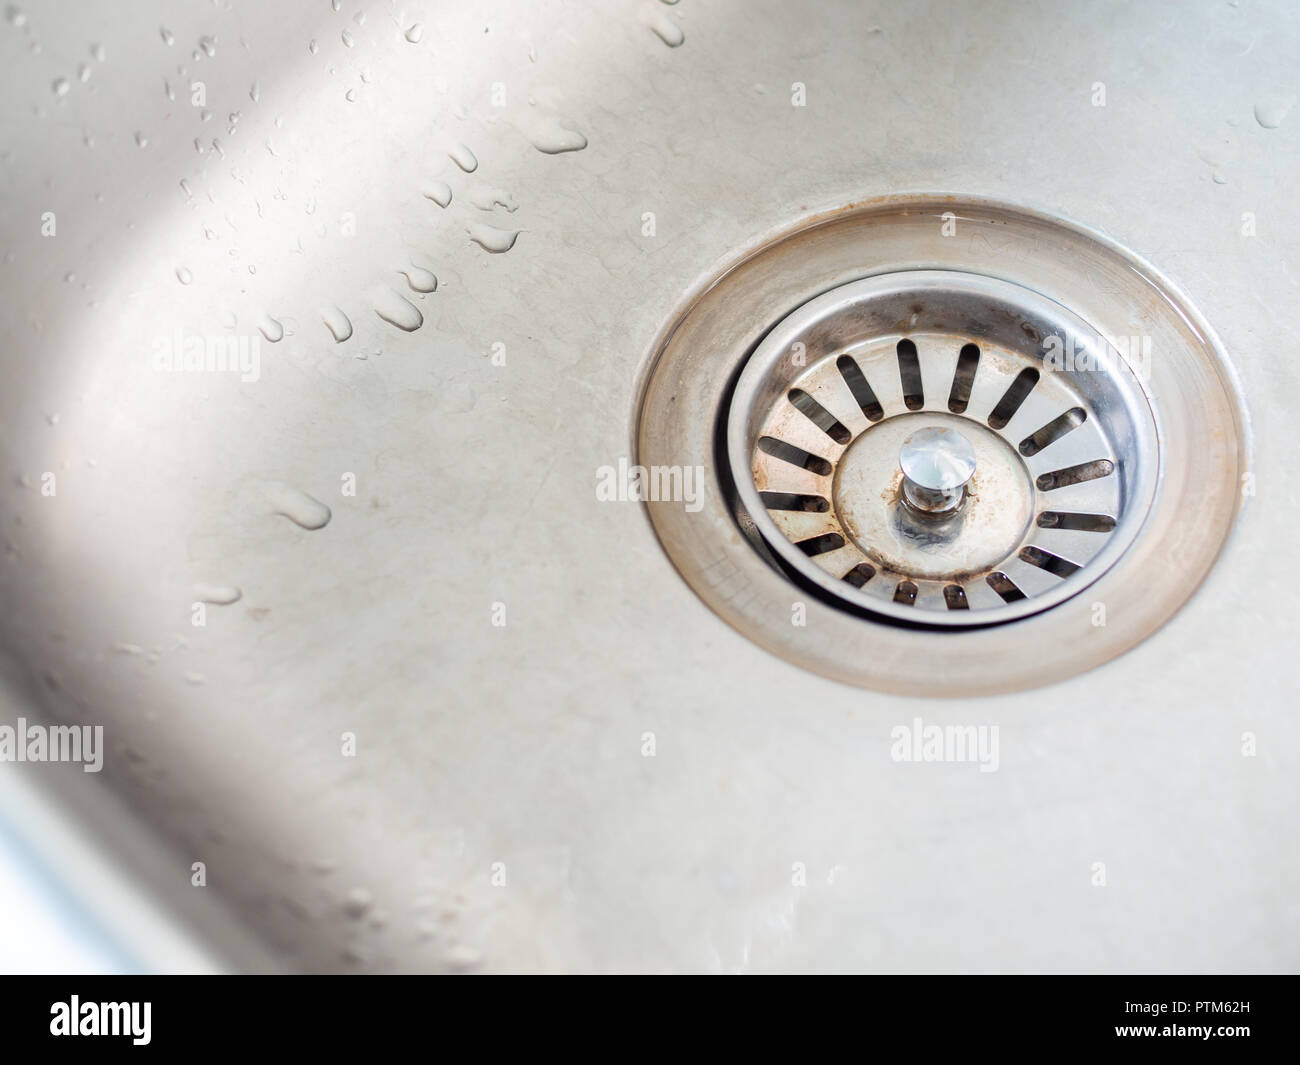 Dirty Stainless Steel Kitchen Sink Drain With Water Stain